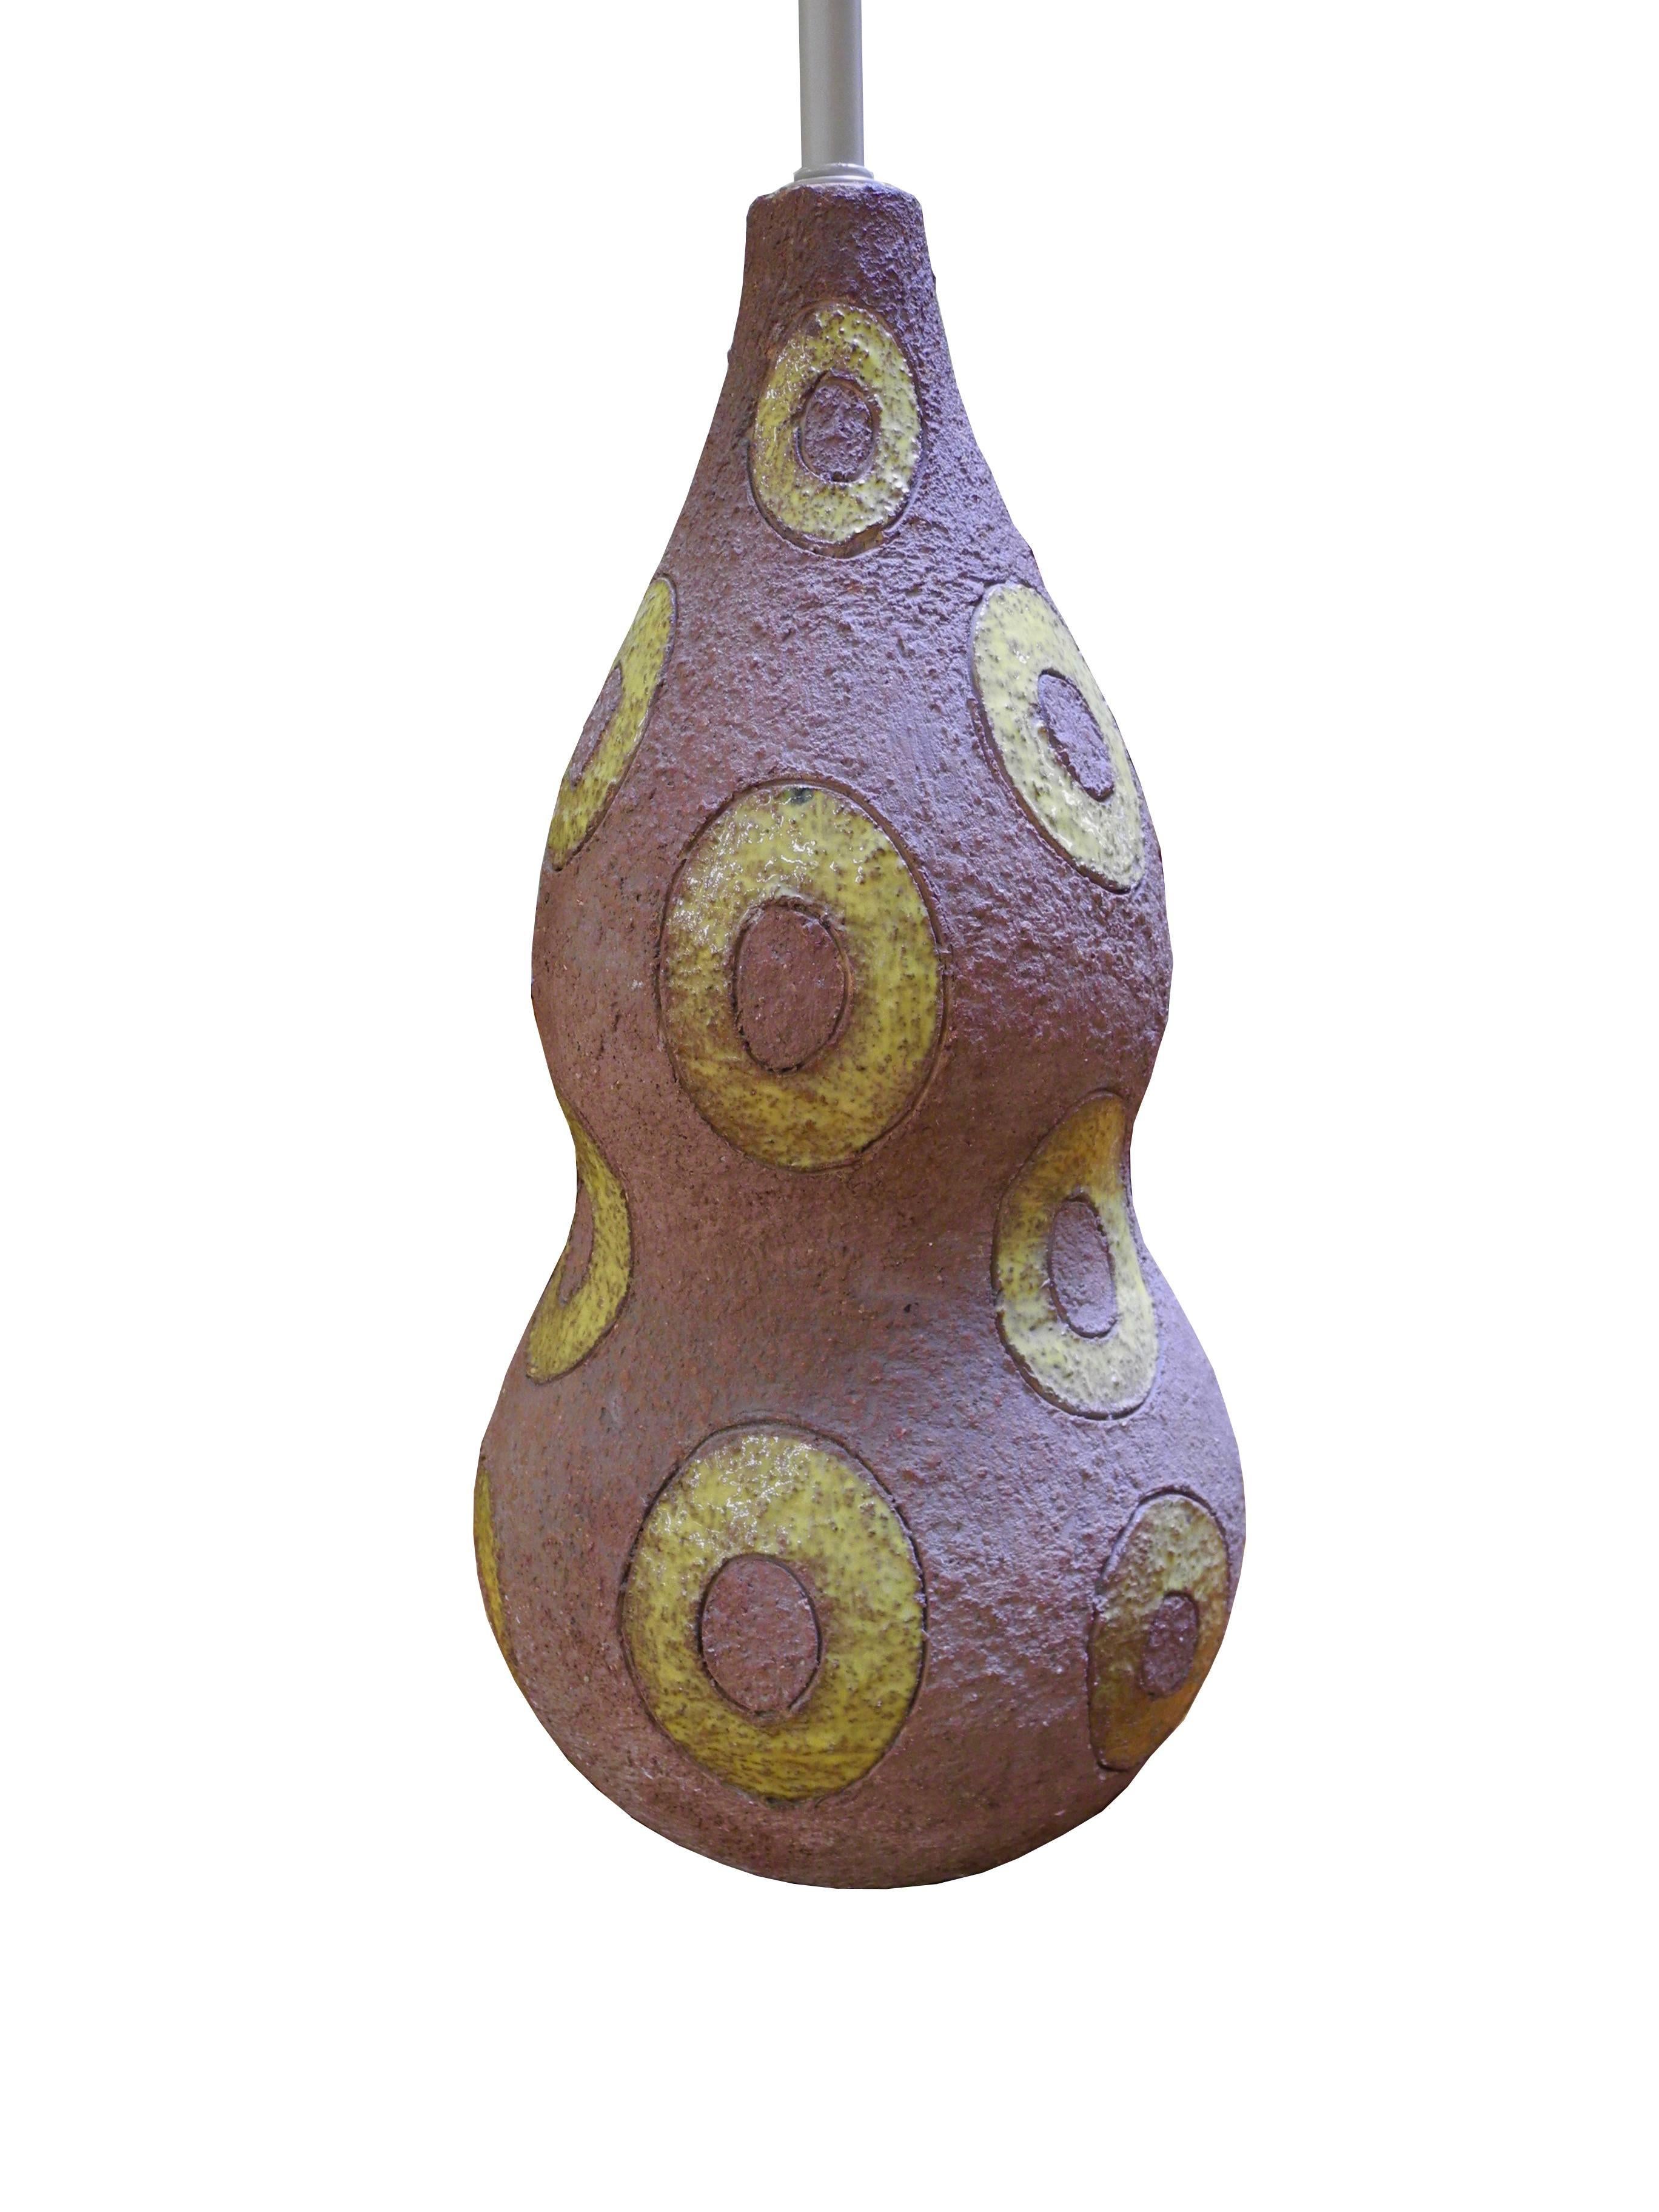 Mid-Century Modern Italian Textured Ceramic Lamp by Ugo Zaccagnini, 1950s For Sale 1